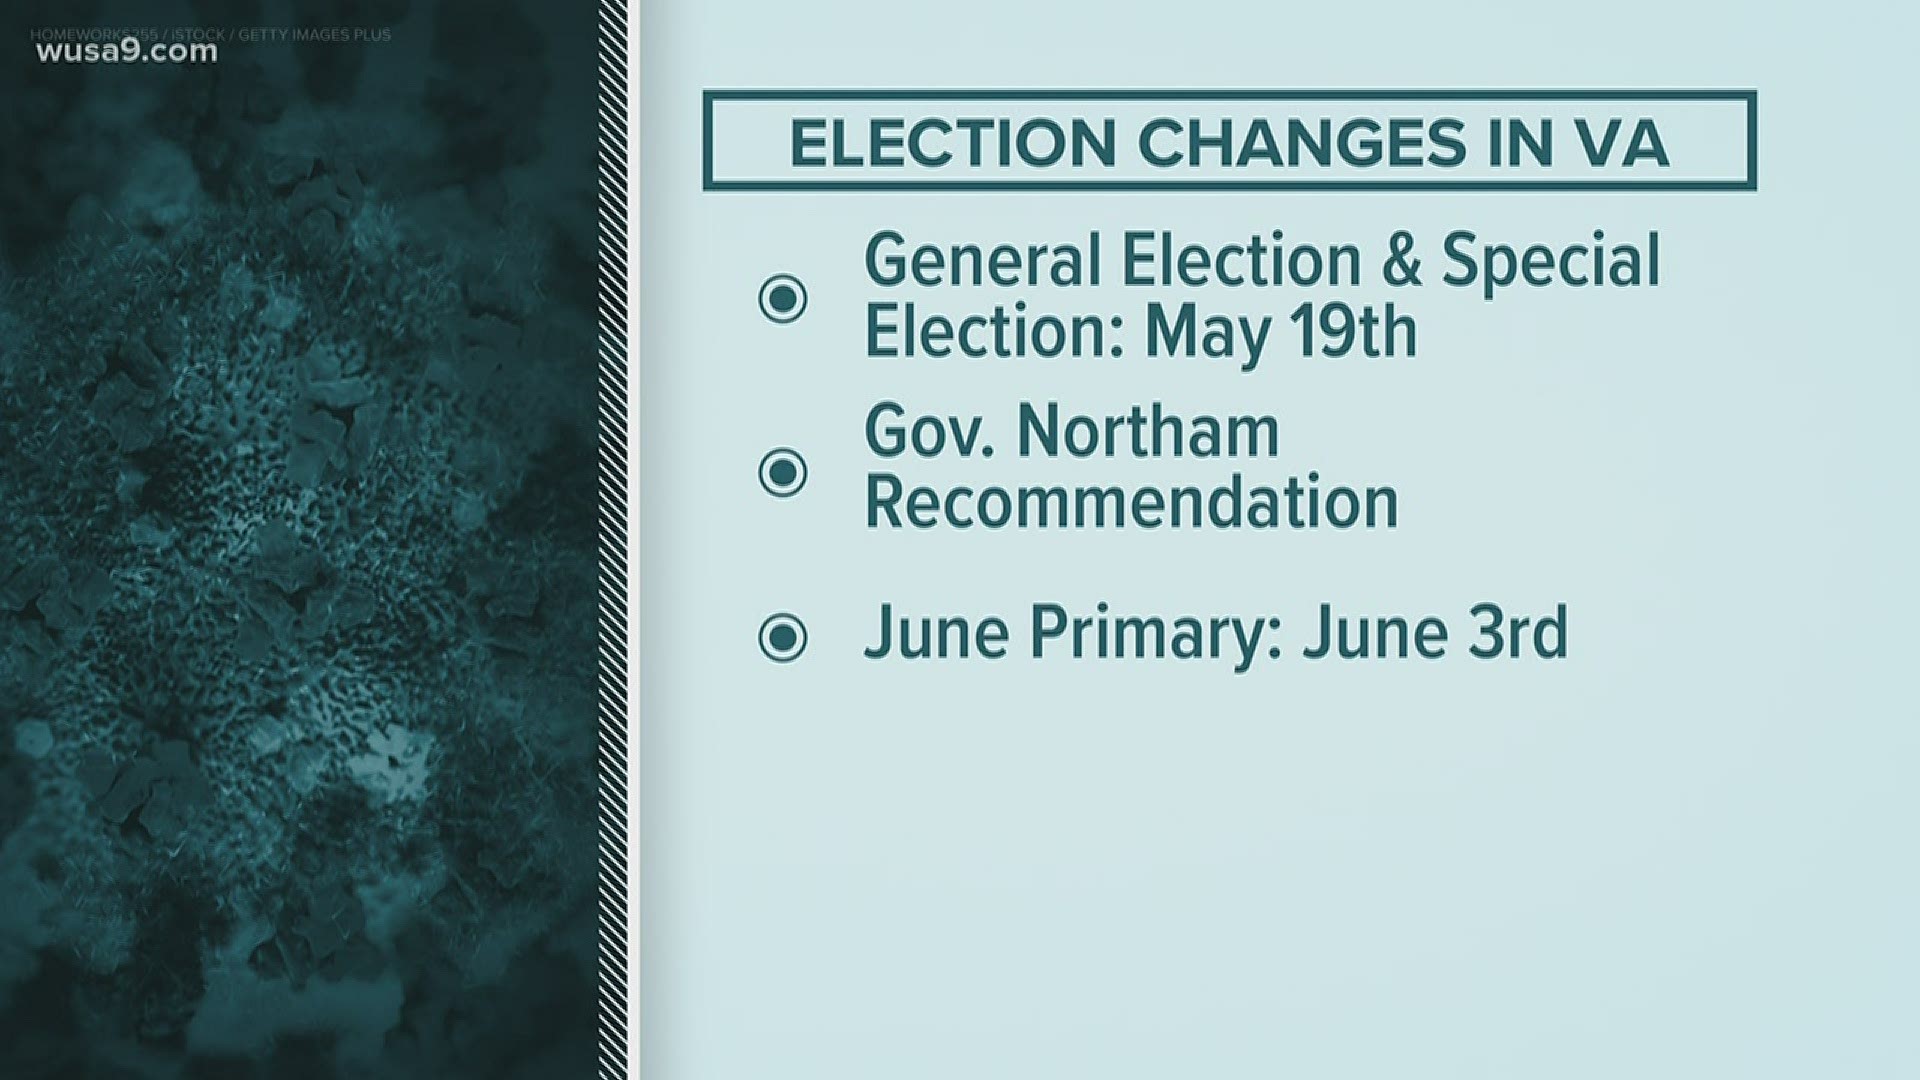 Elections in May and June have been postponed by two weeks. Virginians are encouraged to vote absentee by mail if they can.